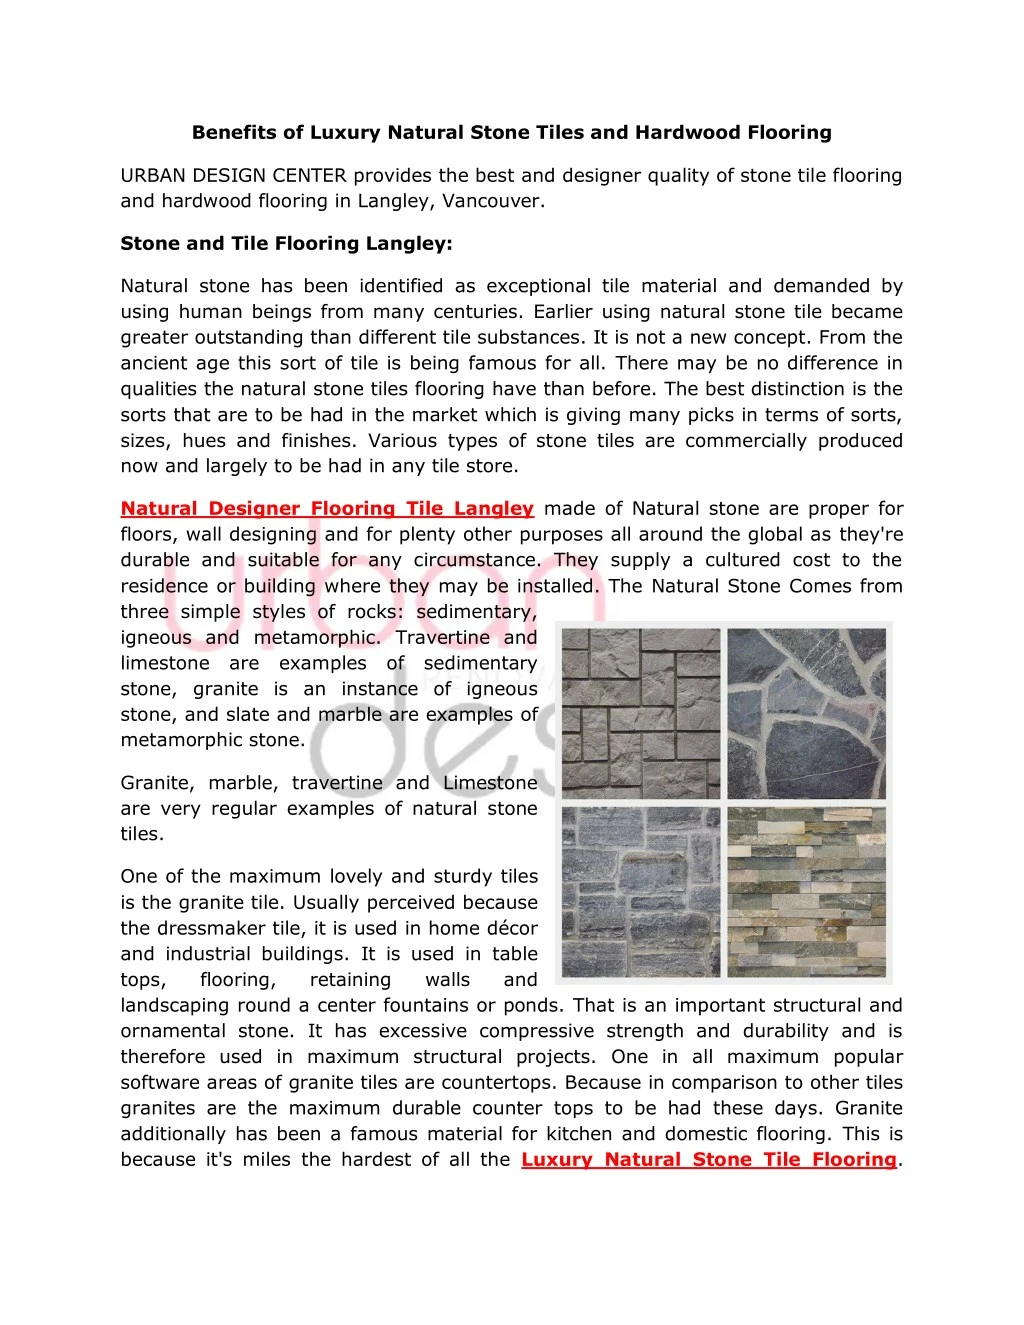 benefits of luxury natural stone tiles